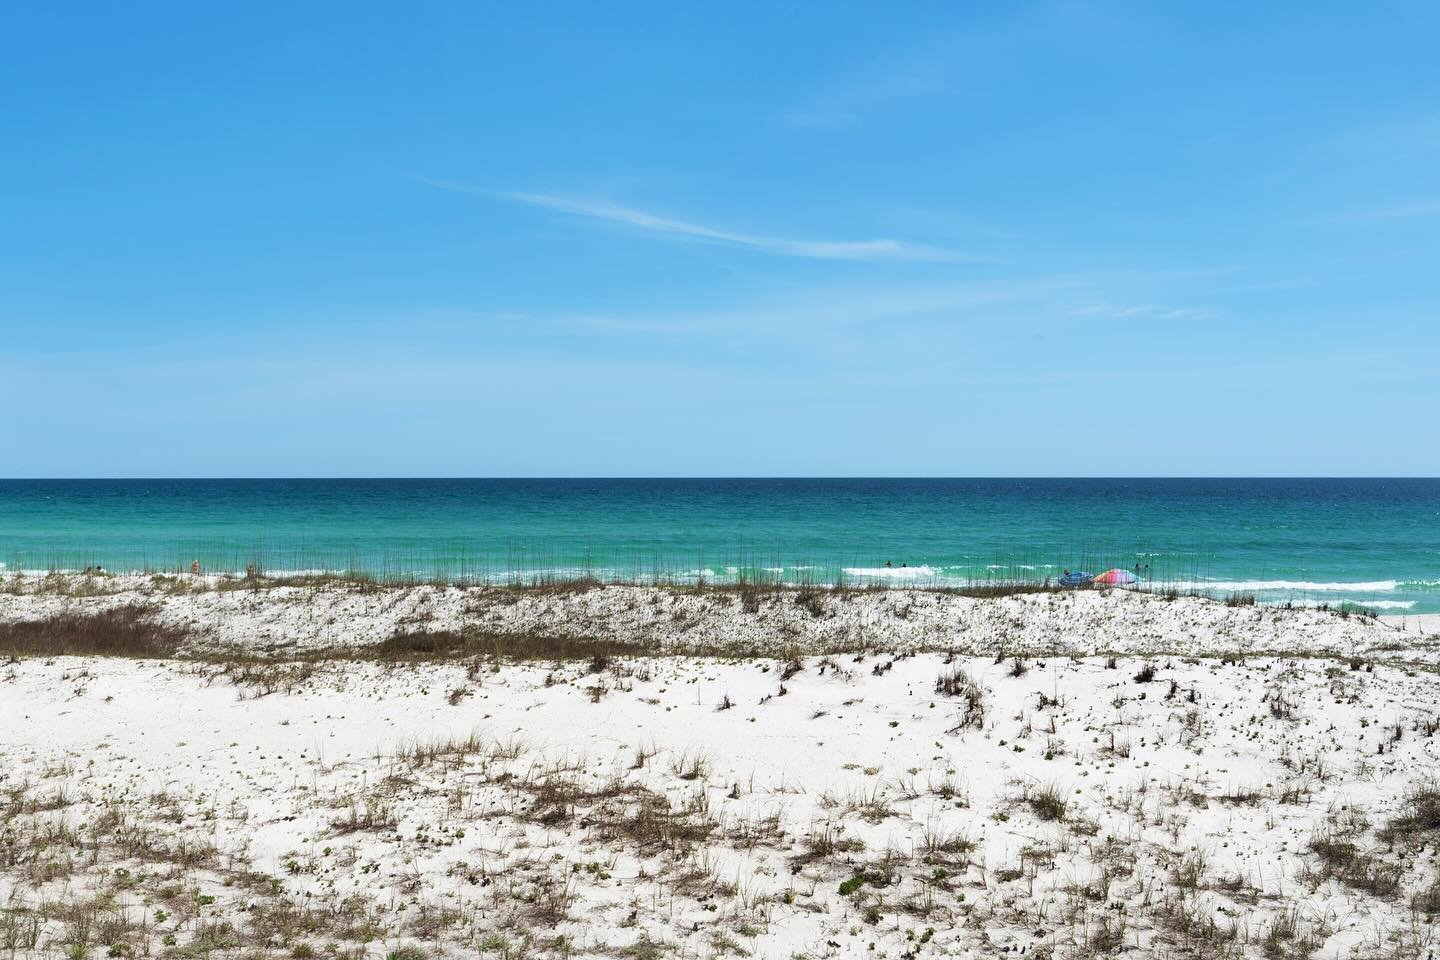 The views at 955 Fort Pickens Road never get old. 🌊🌤️😍

This Gulf Front property is a rental machine with stunning views from almost every seat! It&rsquo;s in an incredible location, just steps from Peg Leg Pete&rsquo;s, Fort Pickens and so many m